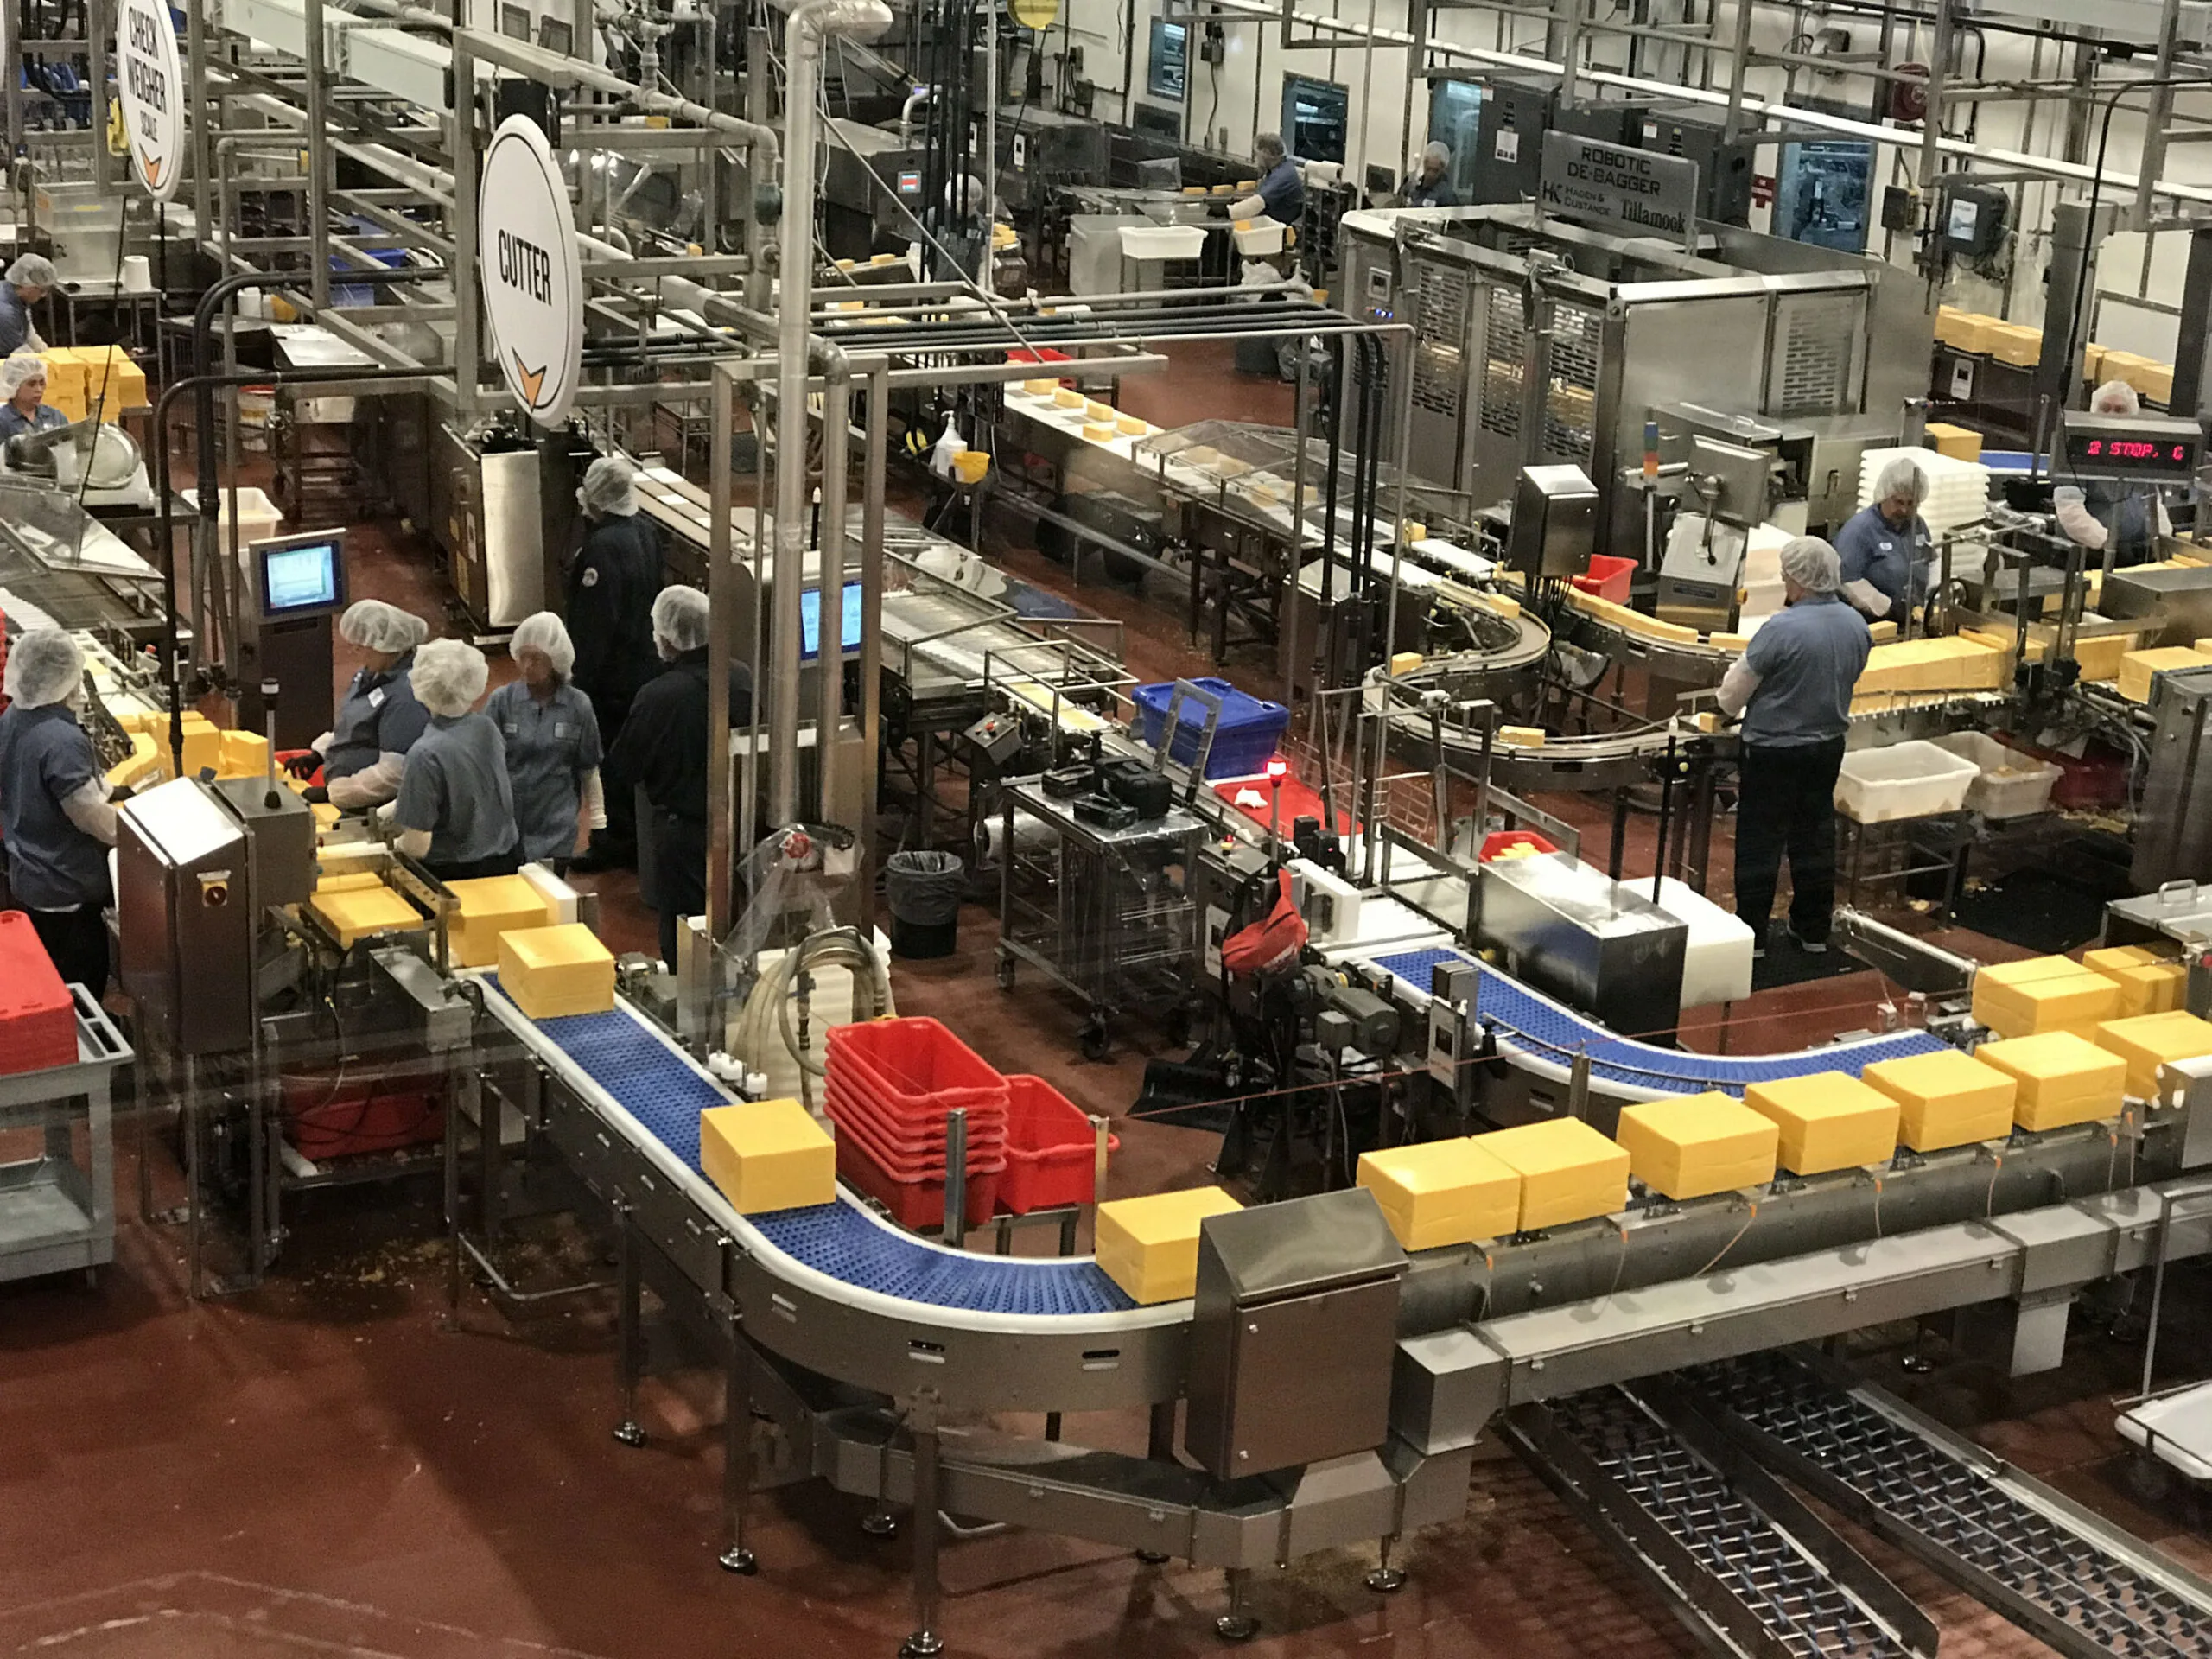 Blocks of Tillamook cheese go by on the production line.